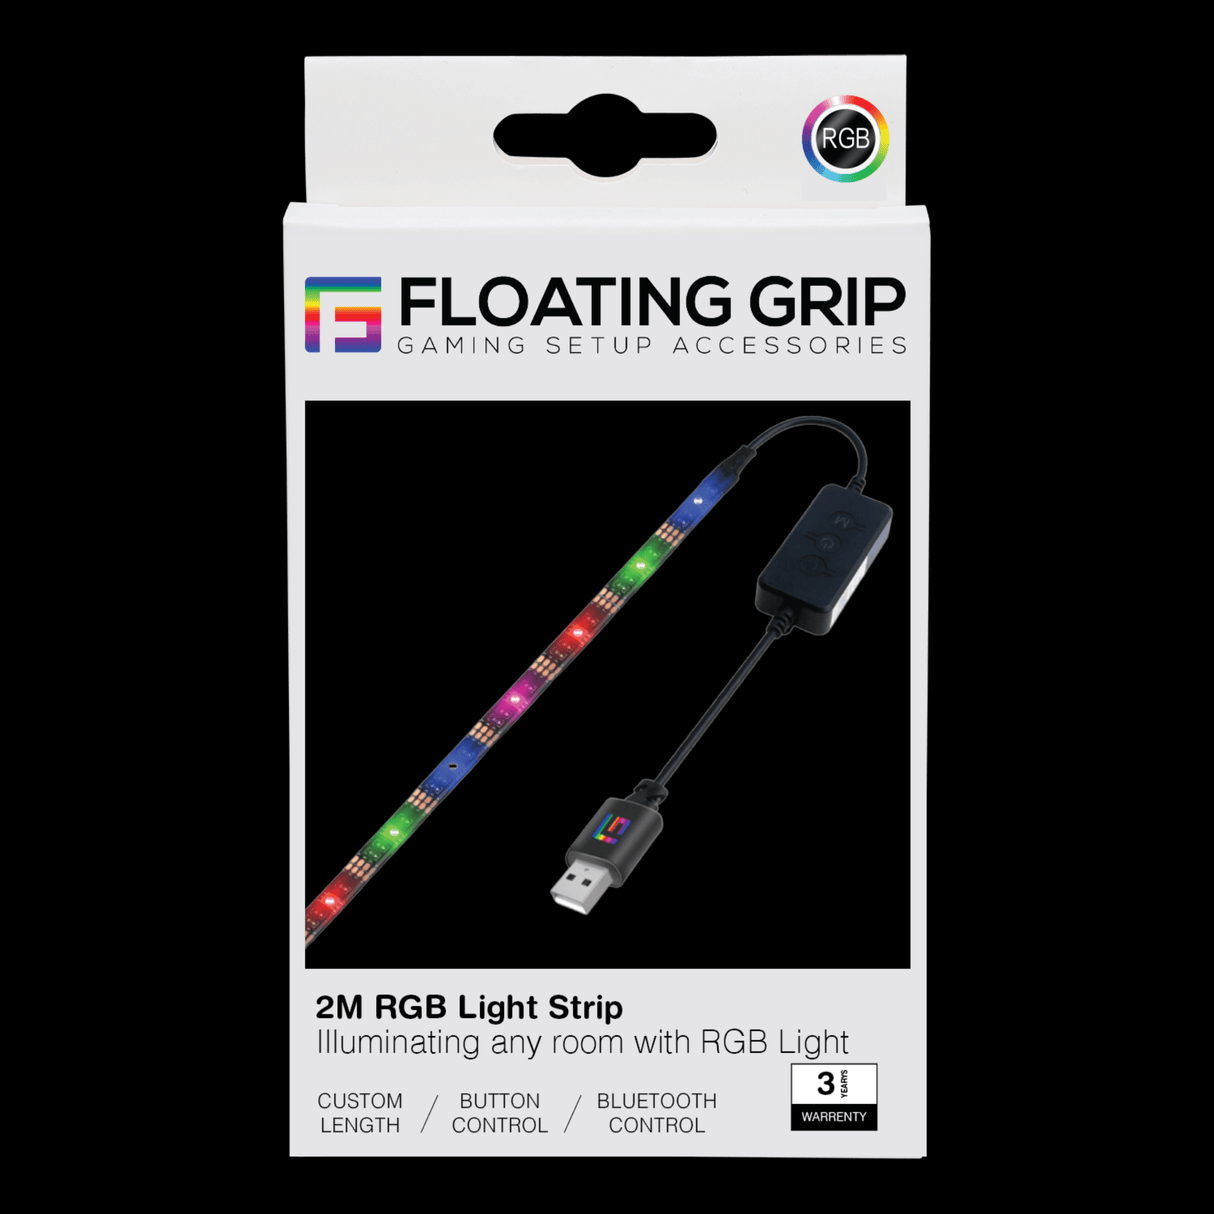 2M/7ft RGB Light Strip with Bluetooth and Remote Control - FLOATING GRIP